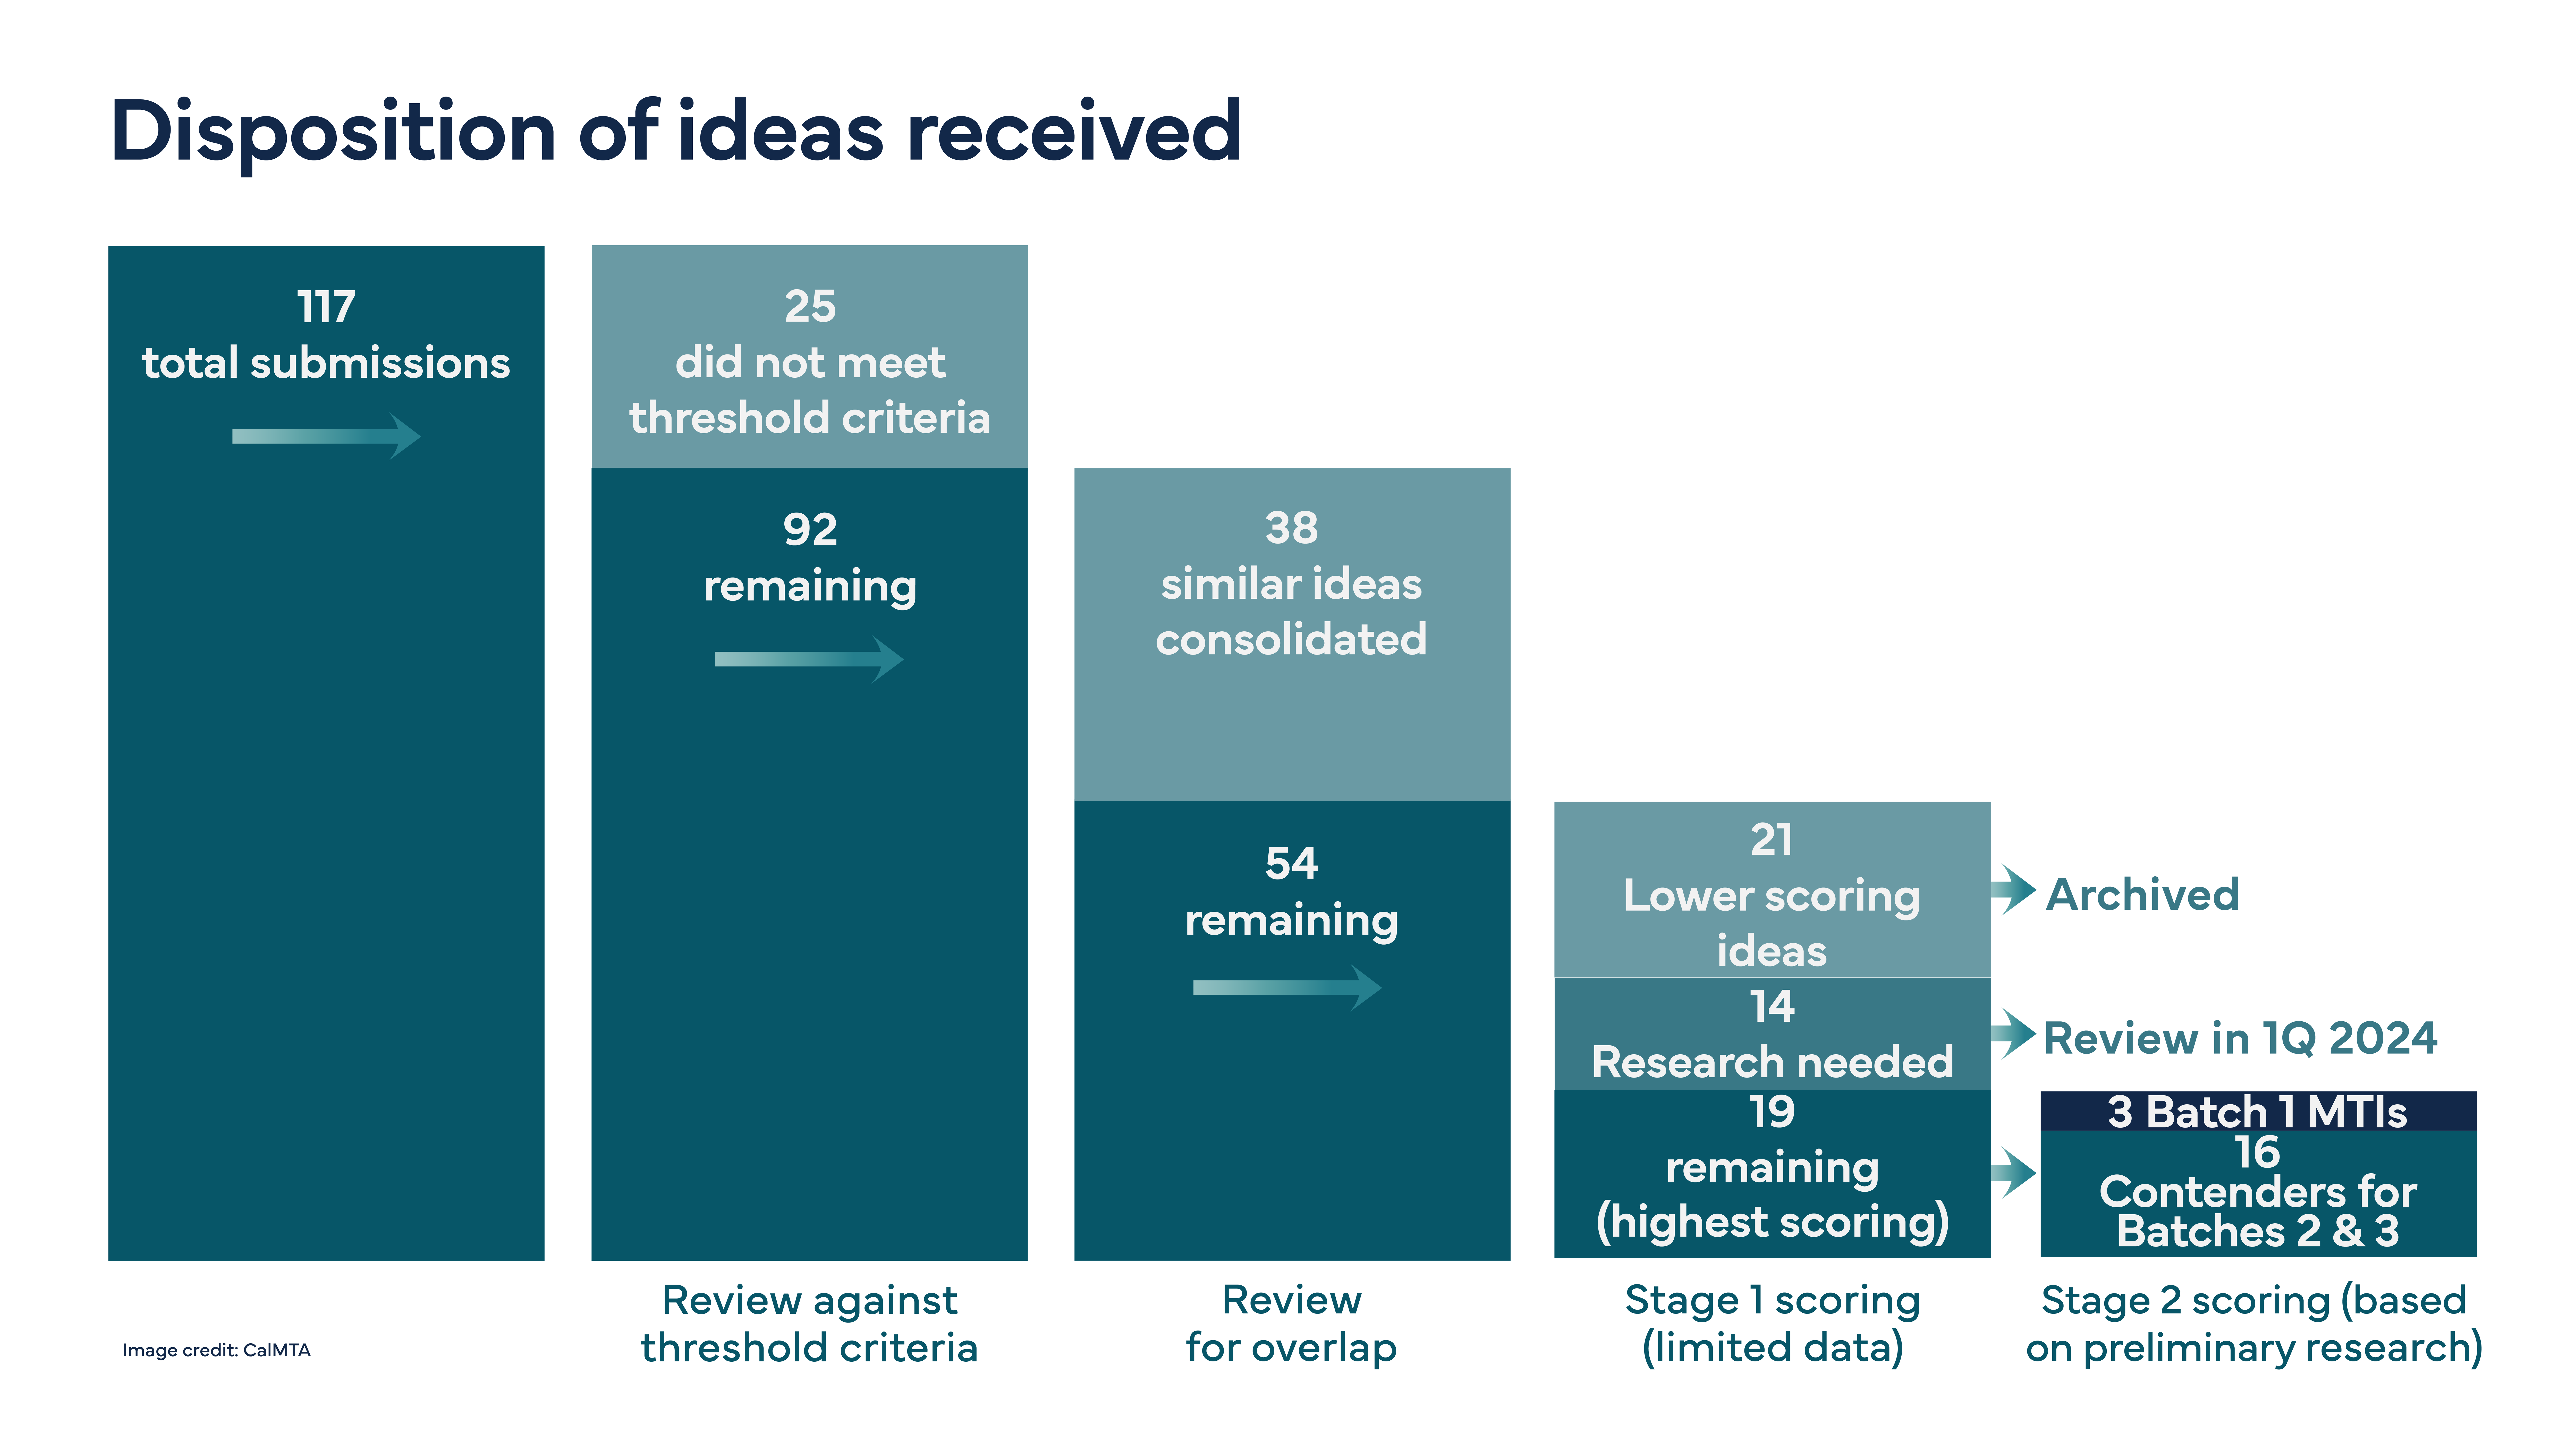 The figure shows the breakdown of how ideas were ultimately disposed through Stage 1 scoring including three that advanced for further research. 